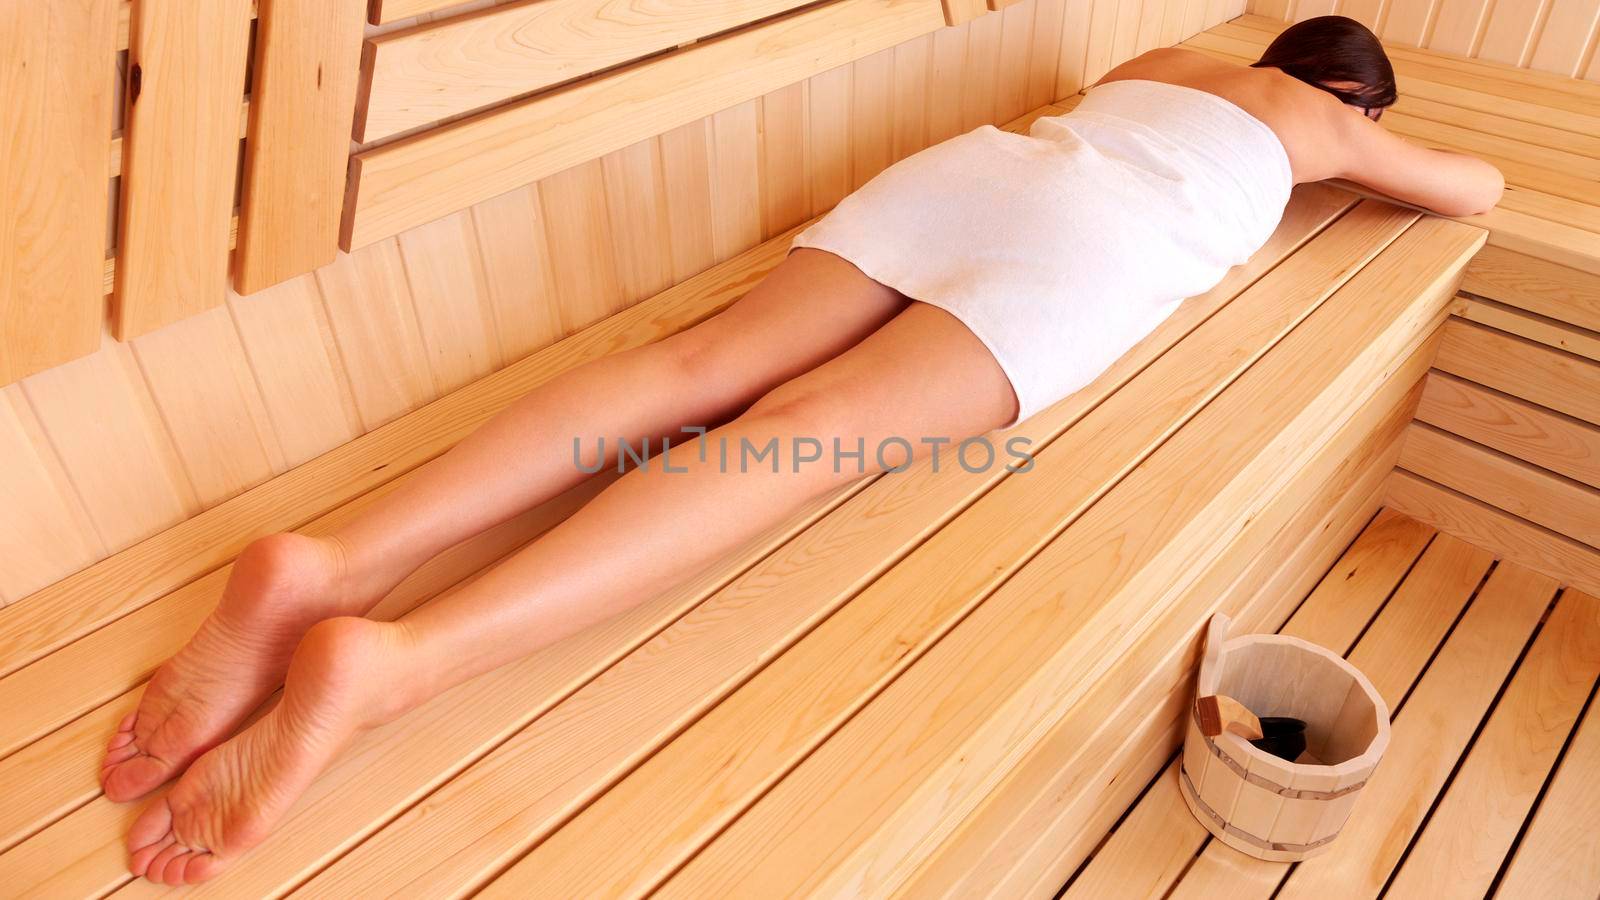 Woman relaxing in a traditional wooden sauna lying on her belly on the bench with a towel wrapped around her body